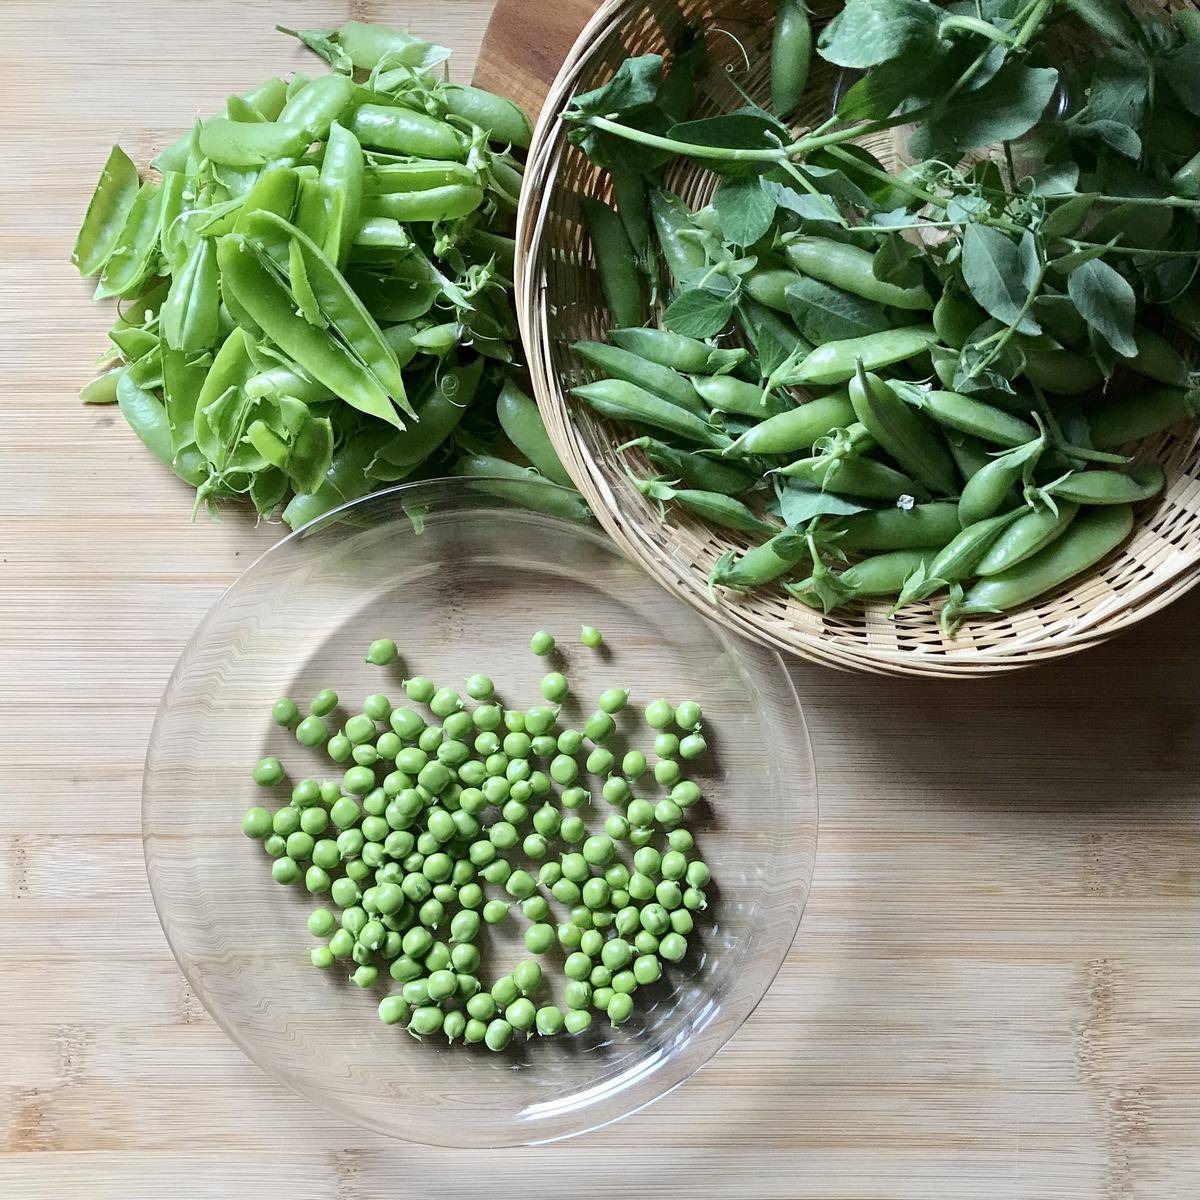 Peas in the process of being shelled.